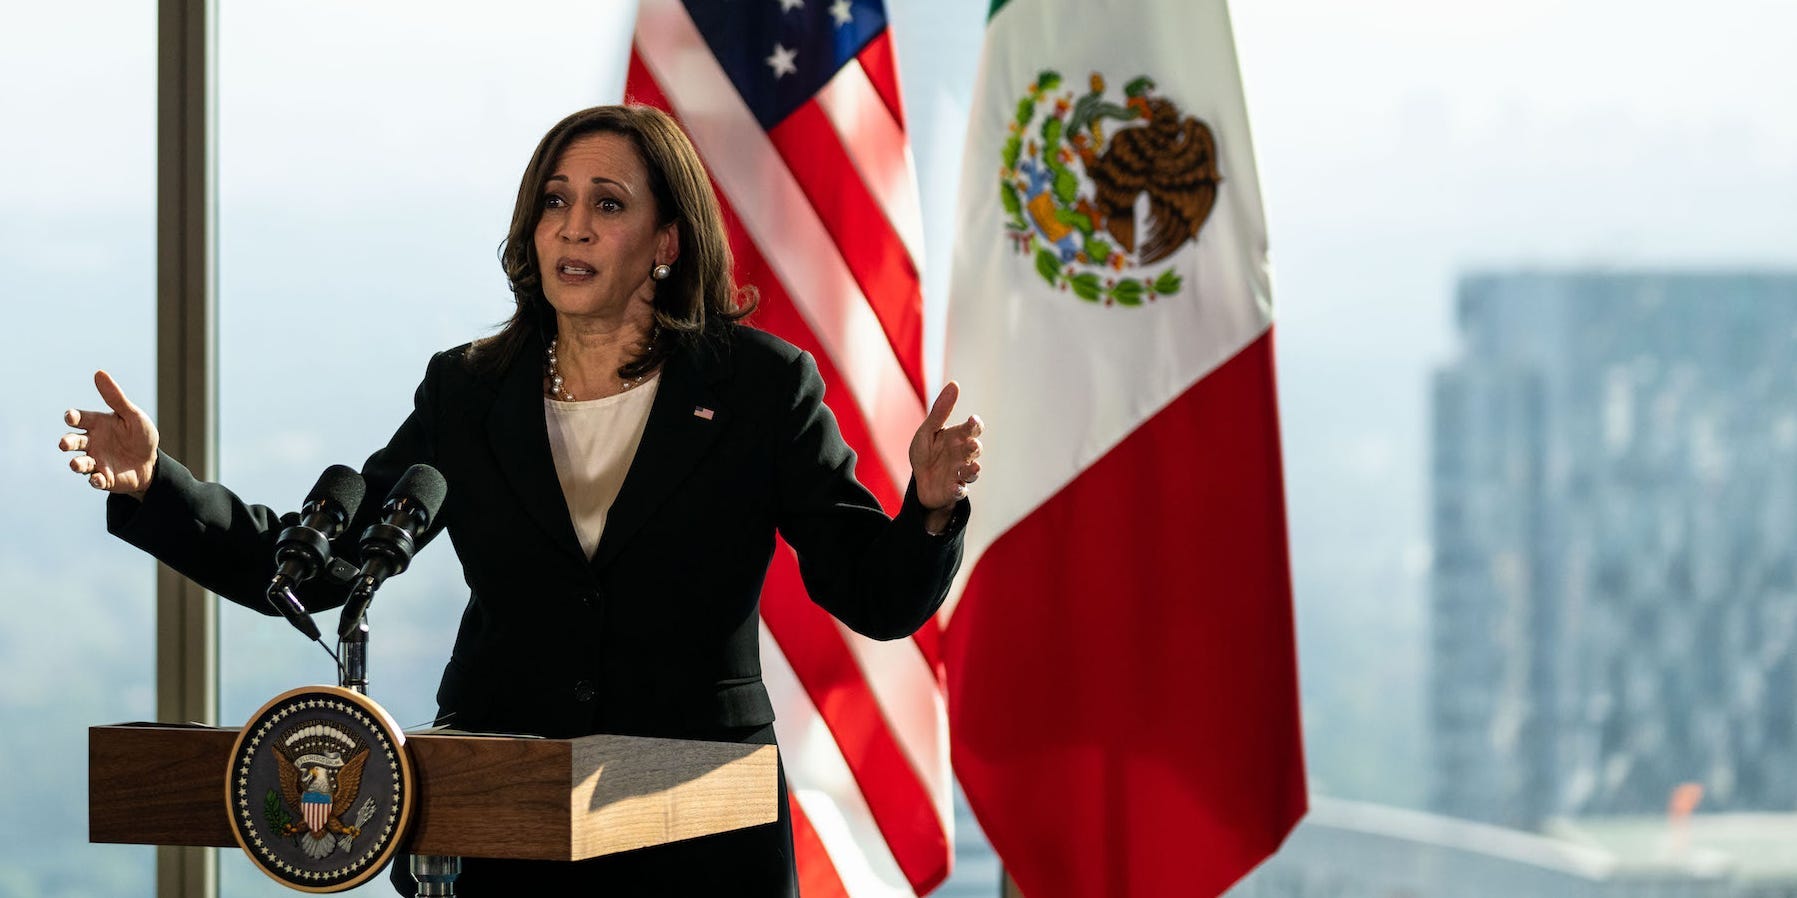 Vice President Kamala Harris speaks at an event in Mexico.